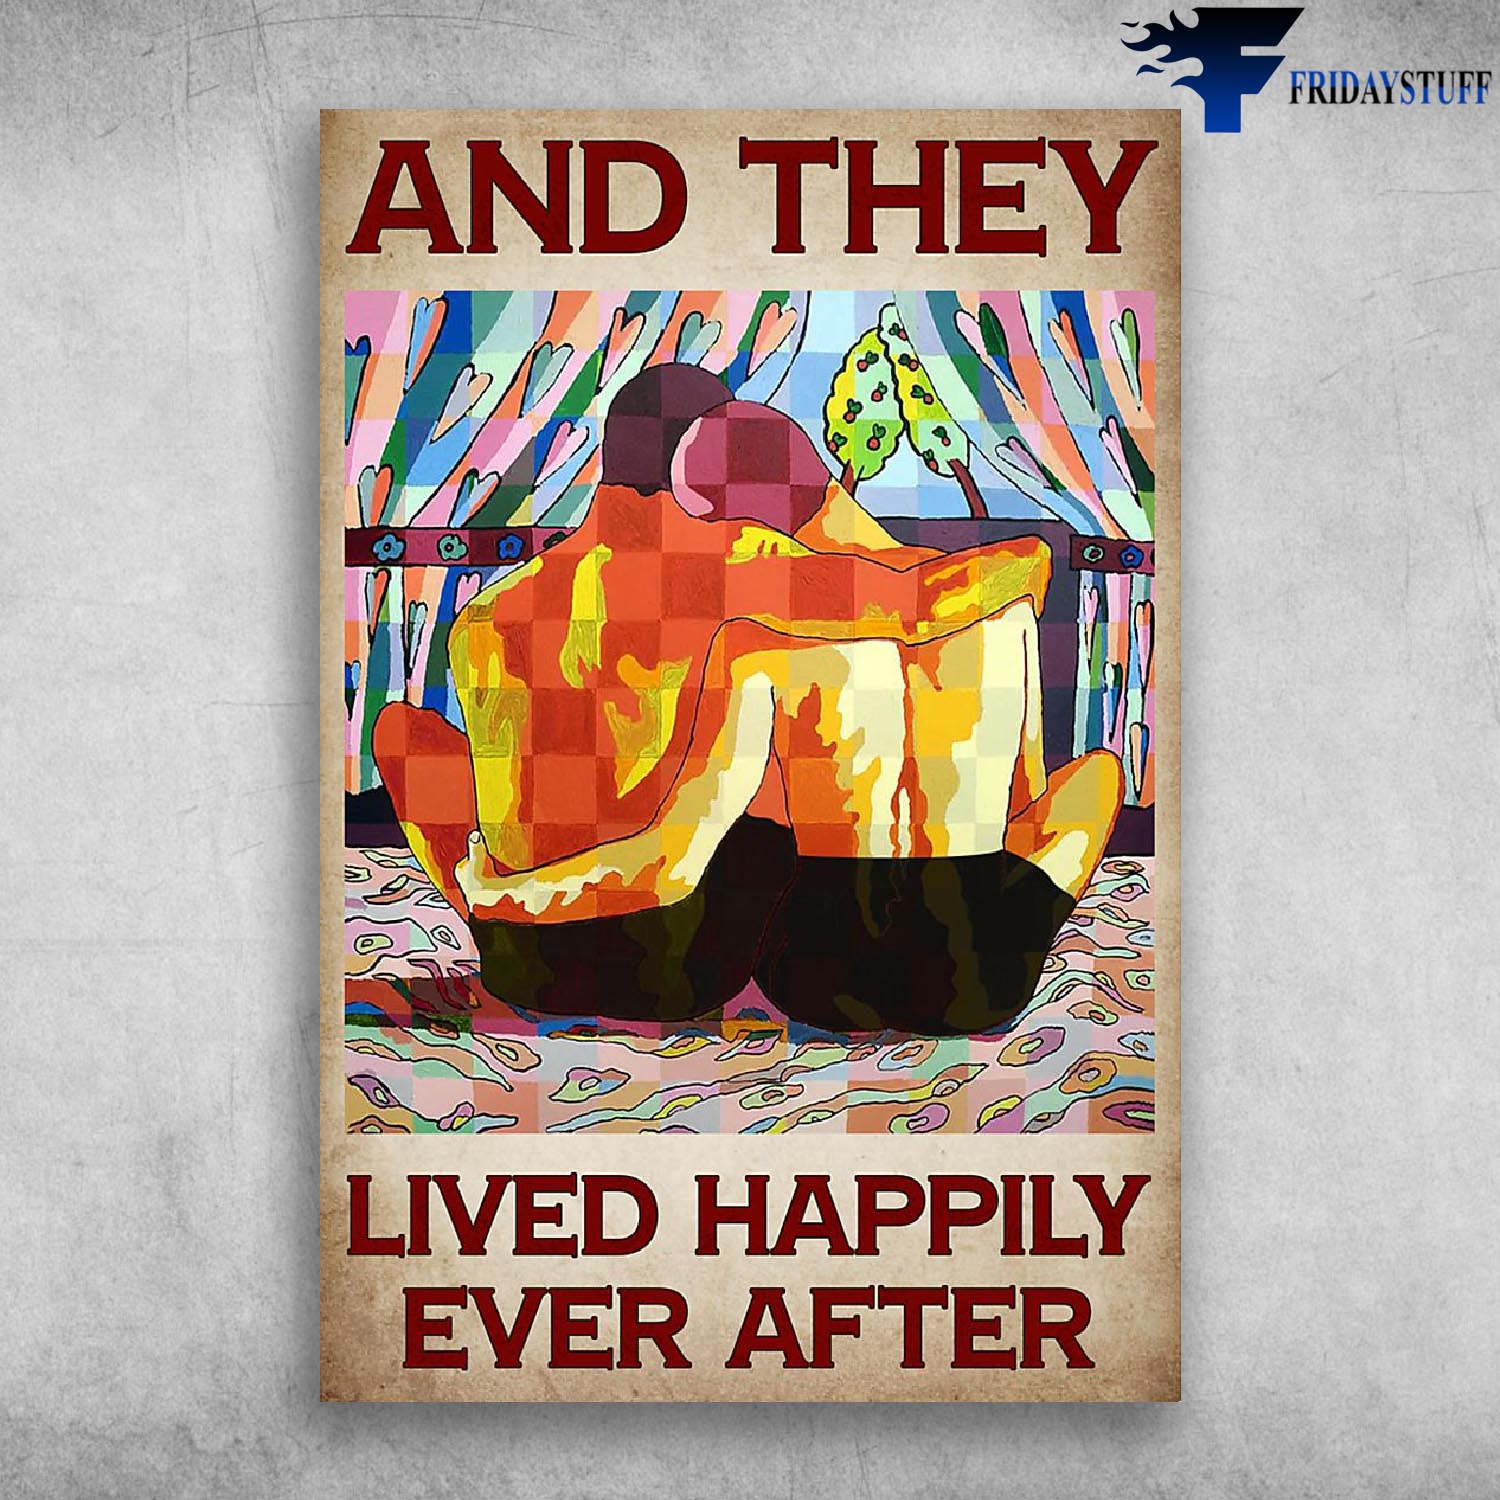 End They Lived Happily Ever After - Couple Man - Lgbt